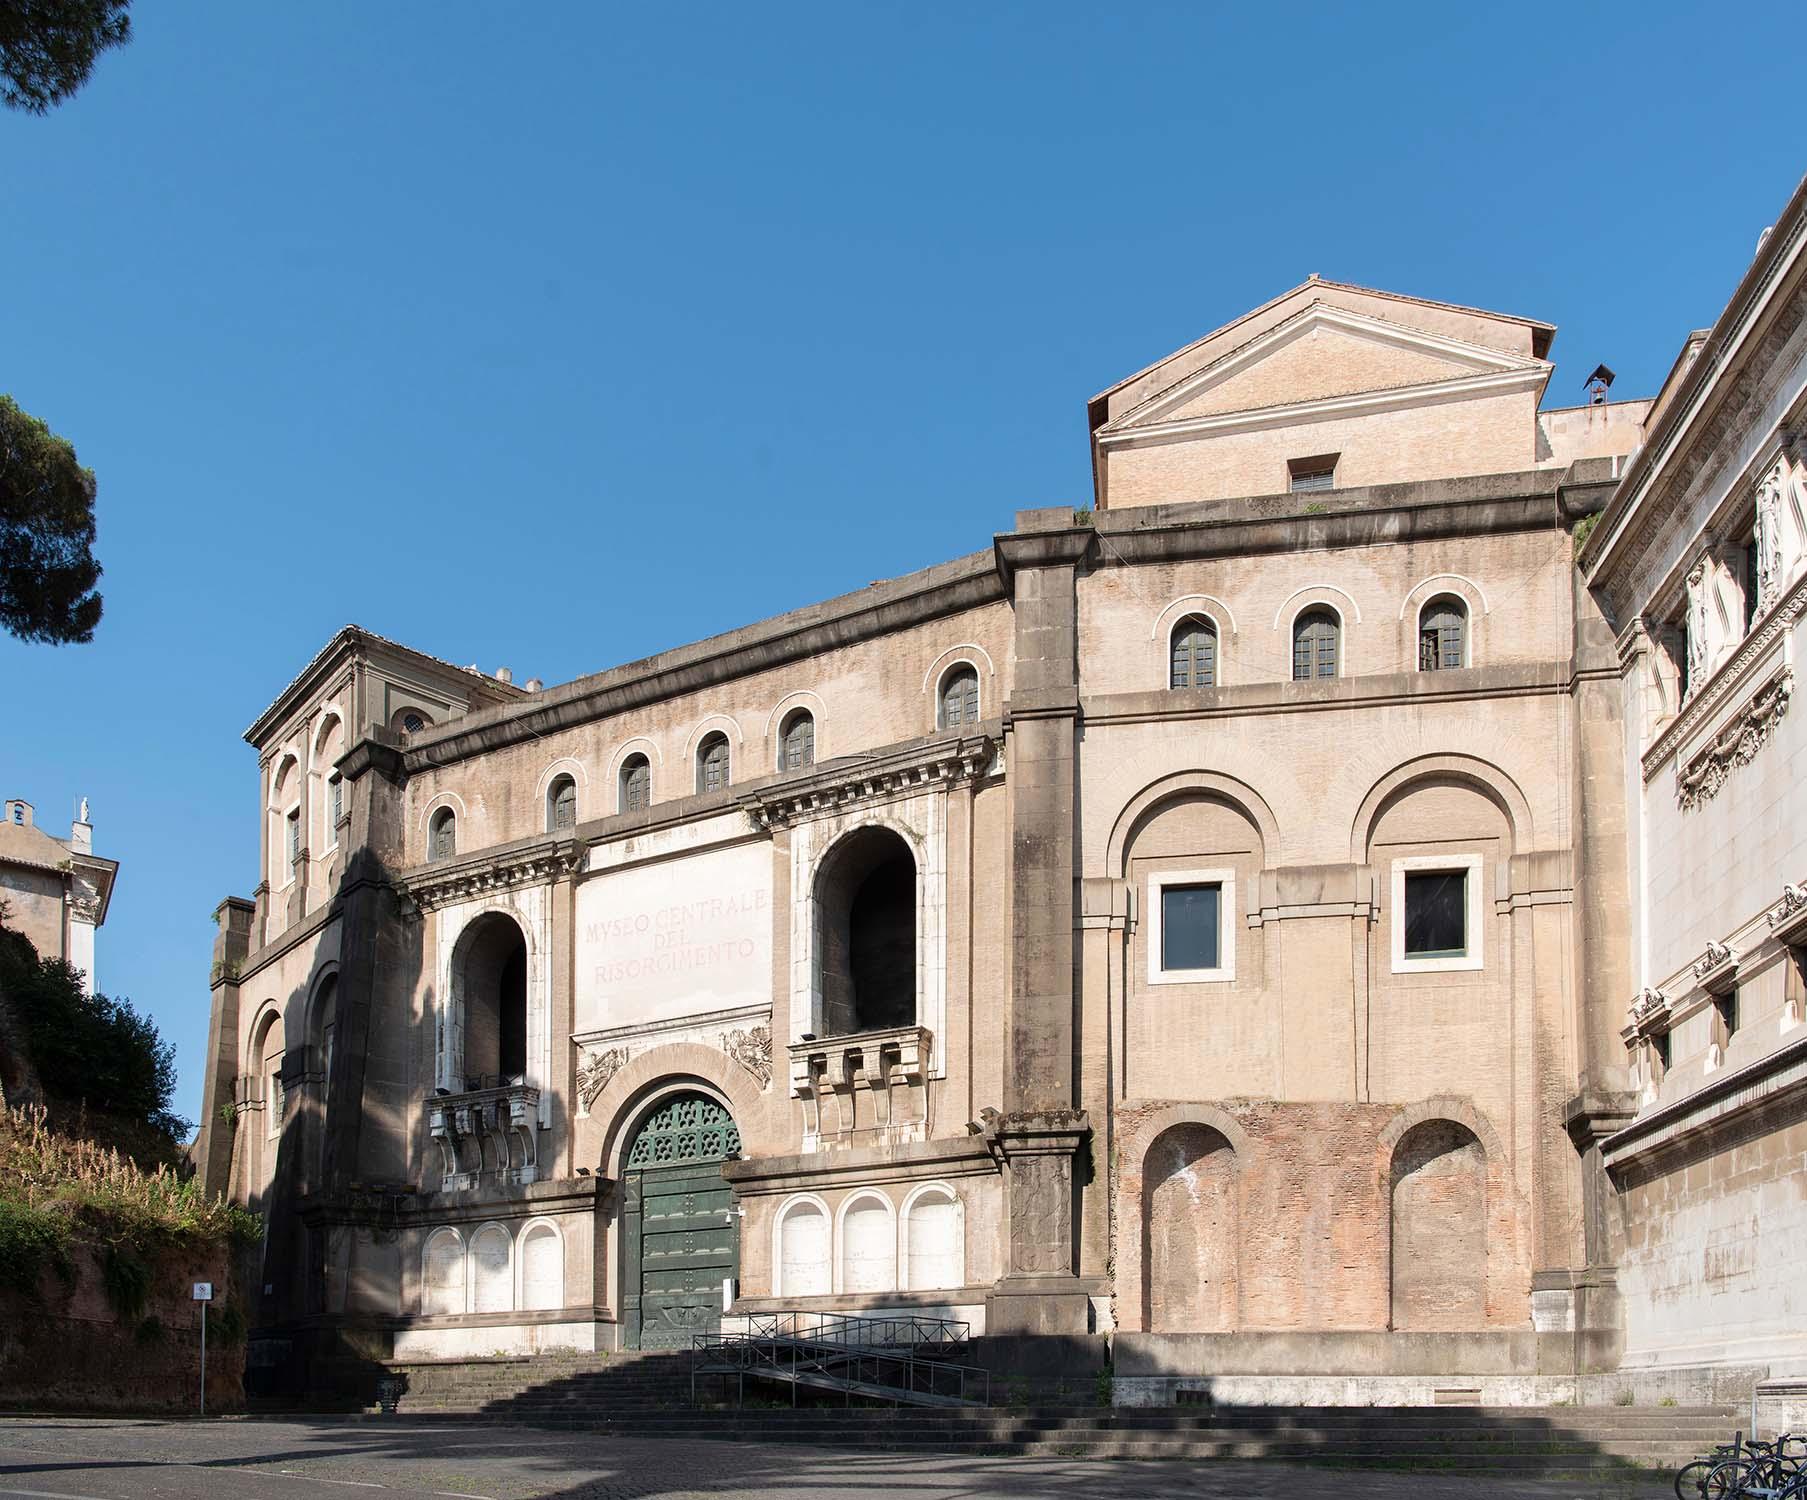 View of the eastern side of the Vittoriano, called the Brasini Wing, with the portico of the Convent of Ara Coeli transformed into the large façade of the Central Museum of the Risorgimento
